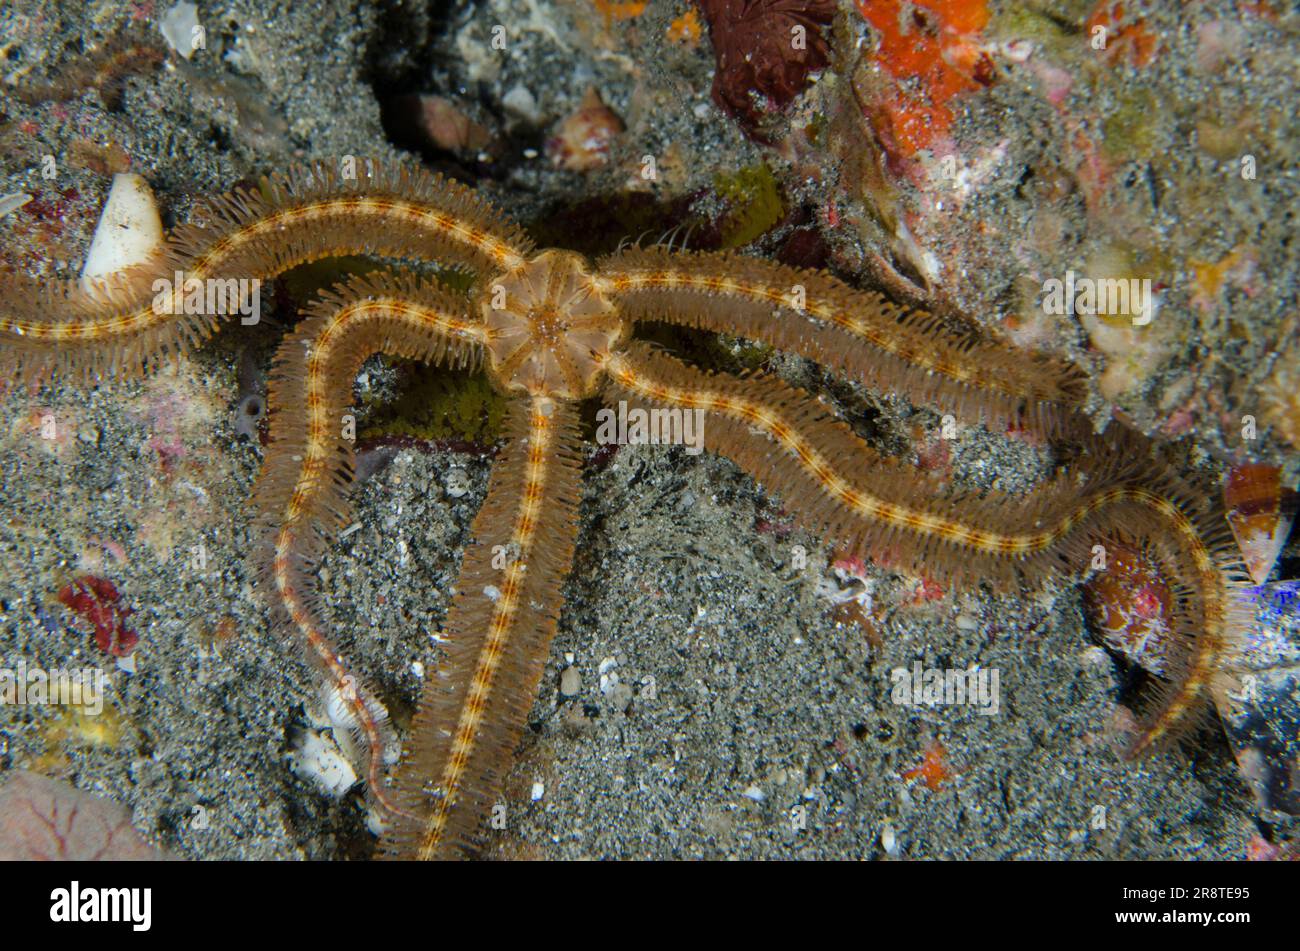 Yellow-lined Brittle Star, Macrophiothrix sp, Jetty dive site, Padang Bai, Bali, Indonesia Stock Photo